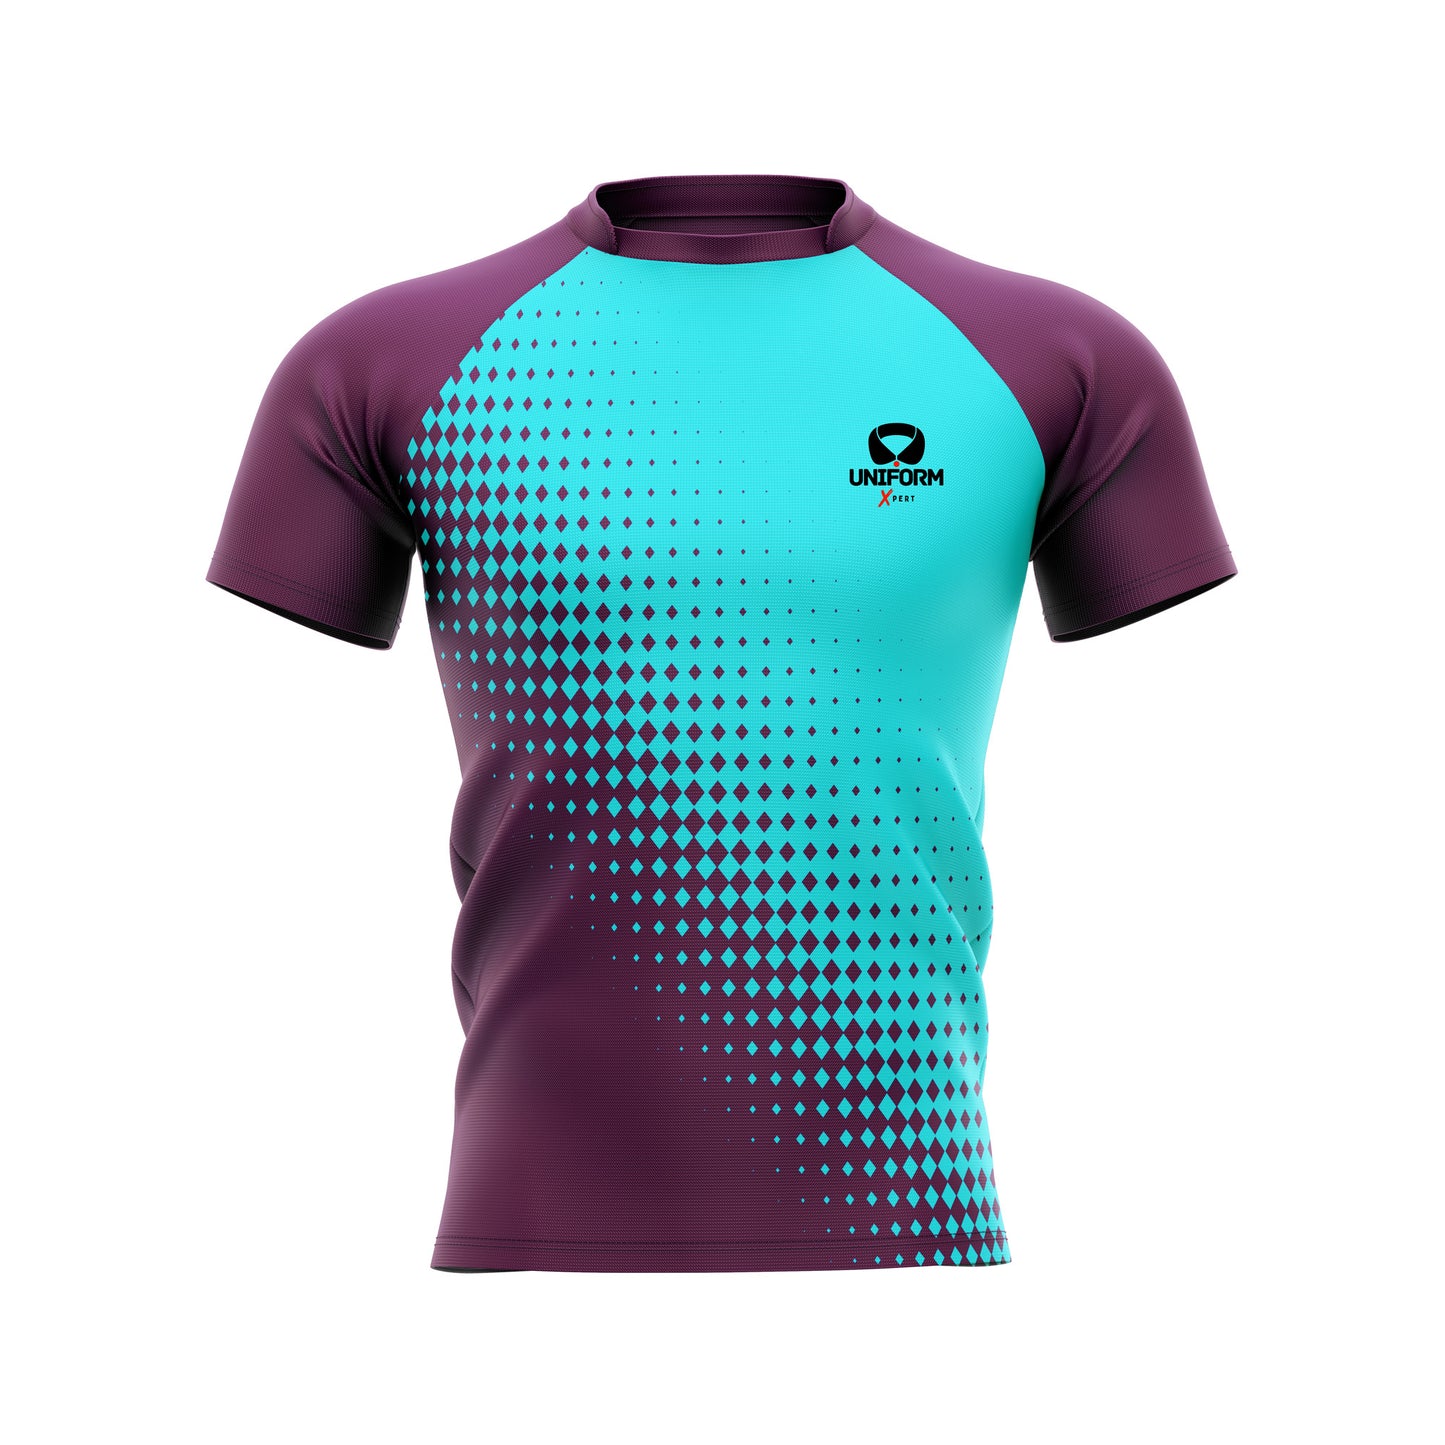 Custom Rugby Jerseys for Teams | Personalized Rugby Shirts